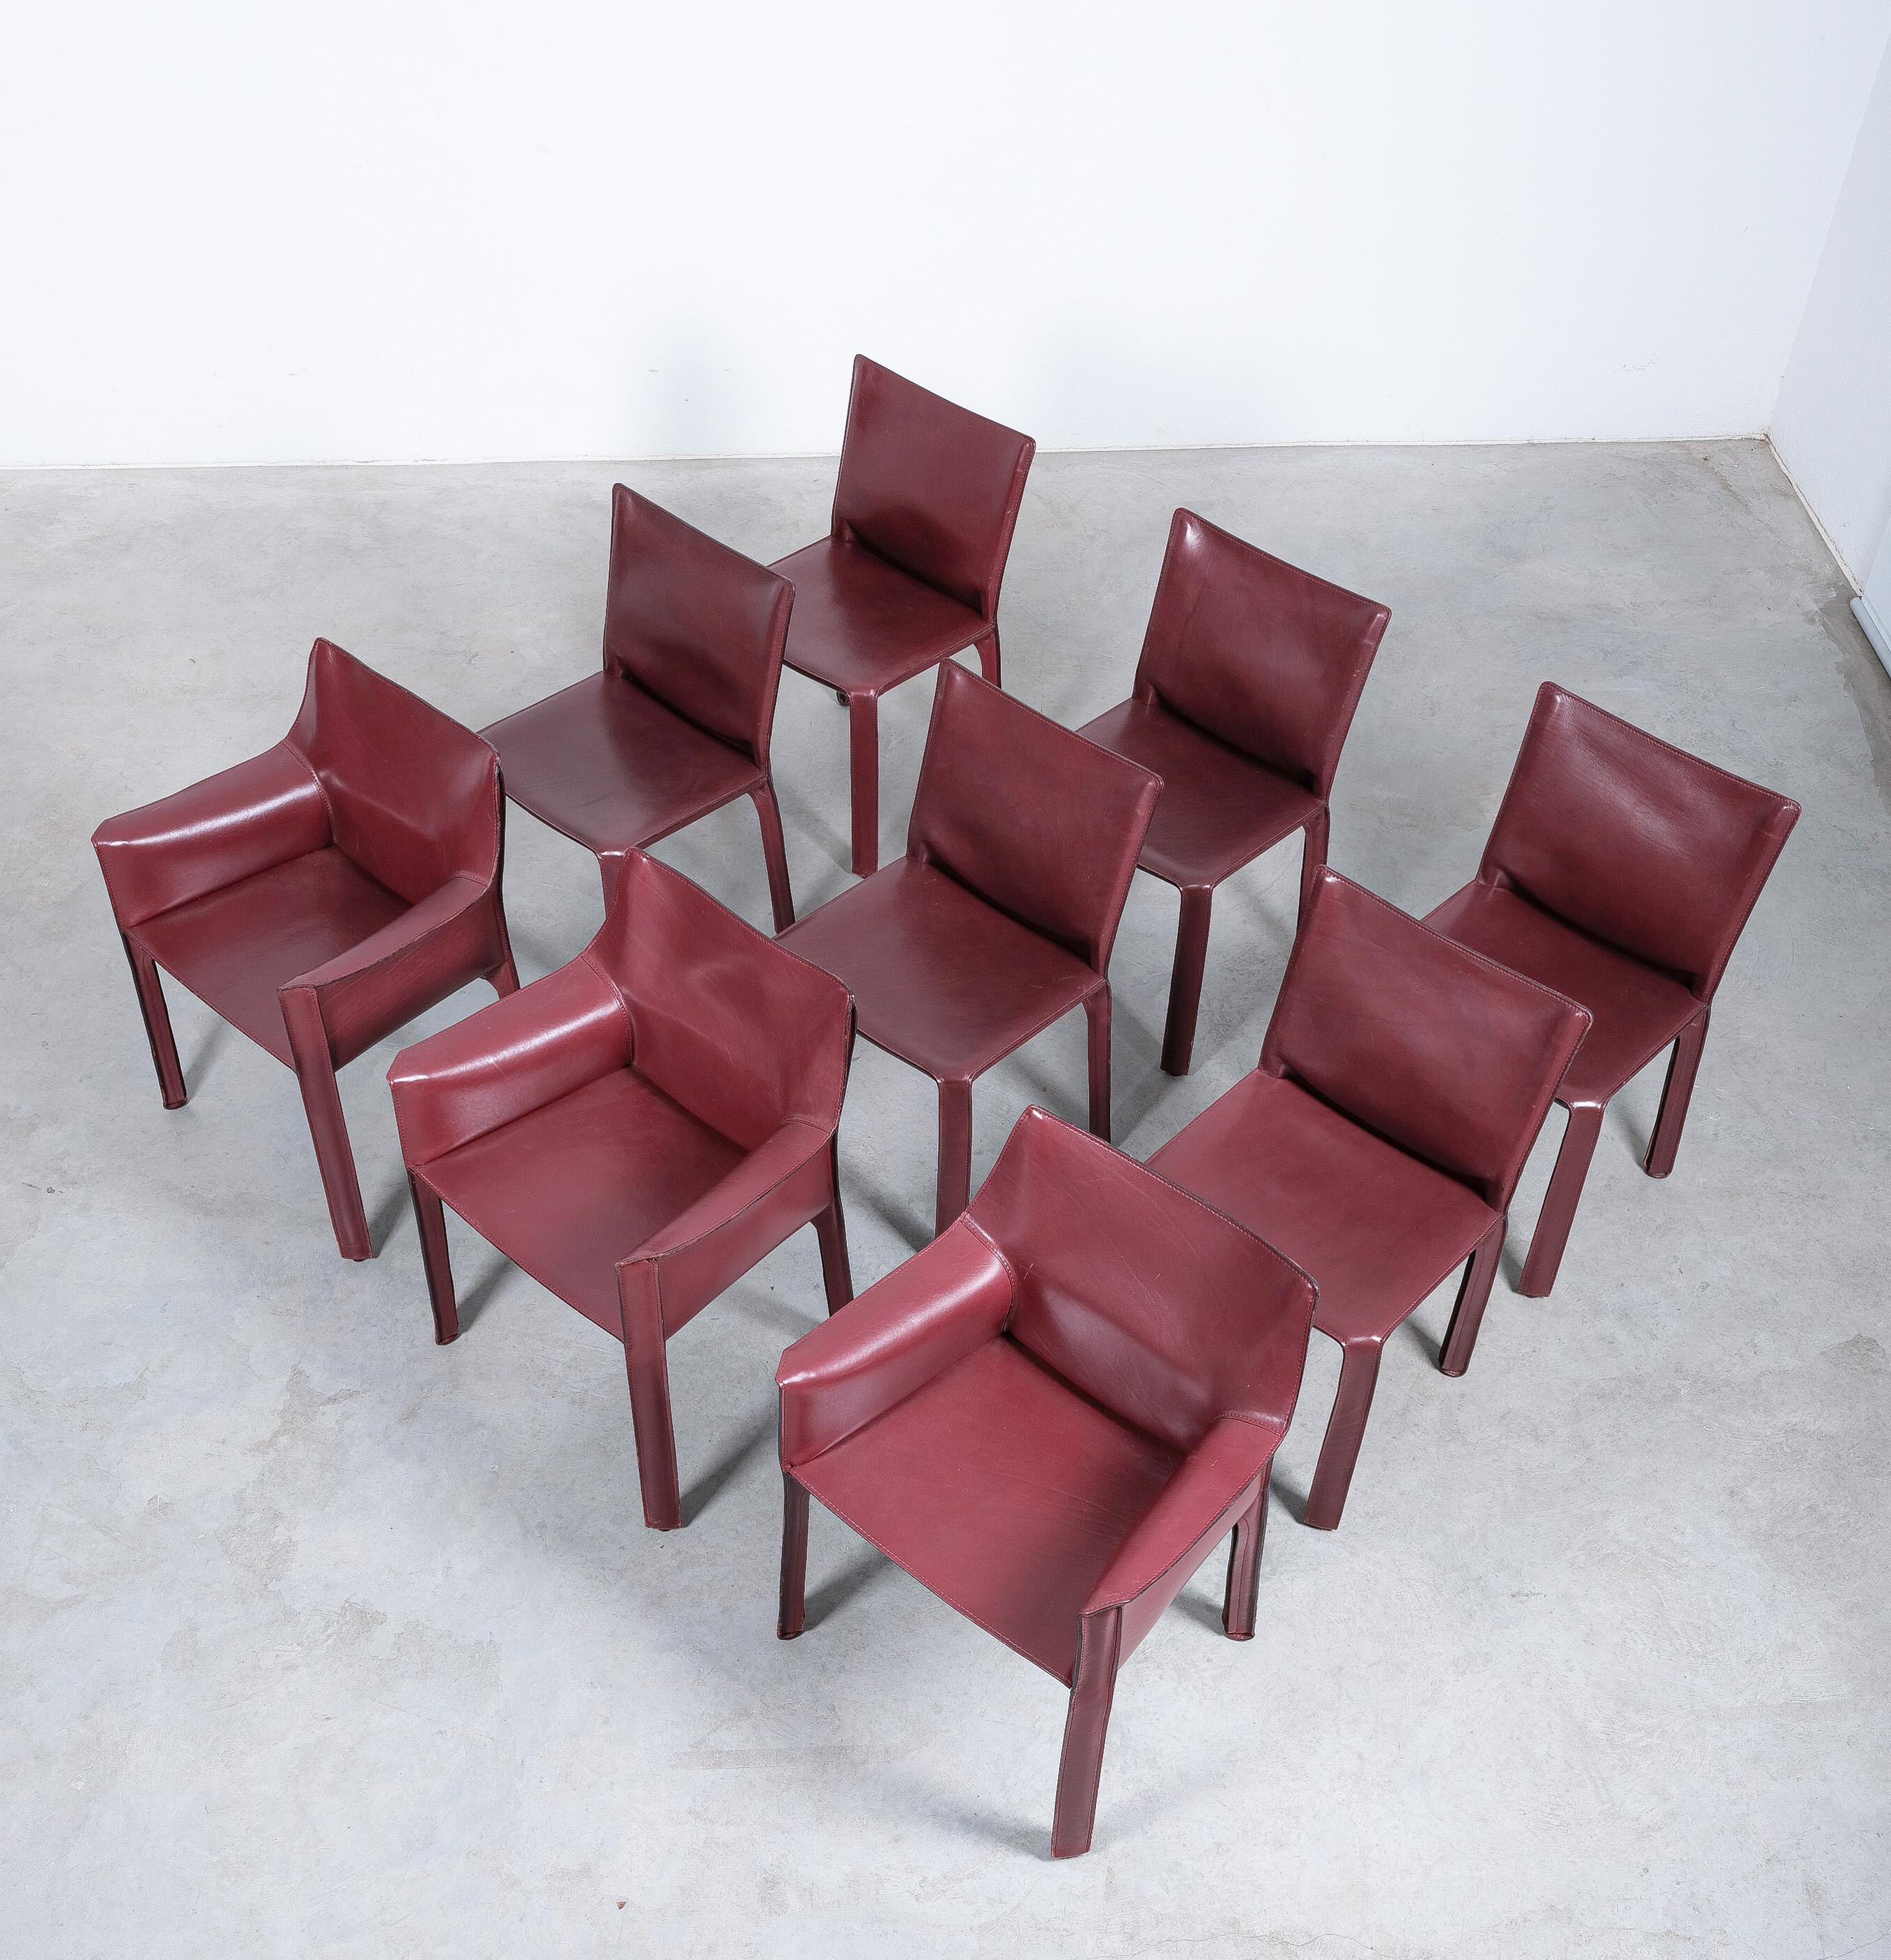 Mario Bellini Cassina Cab 413 Burgundy Red Leather Dining Chairs, 1980 For Sale 8